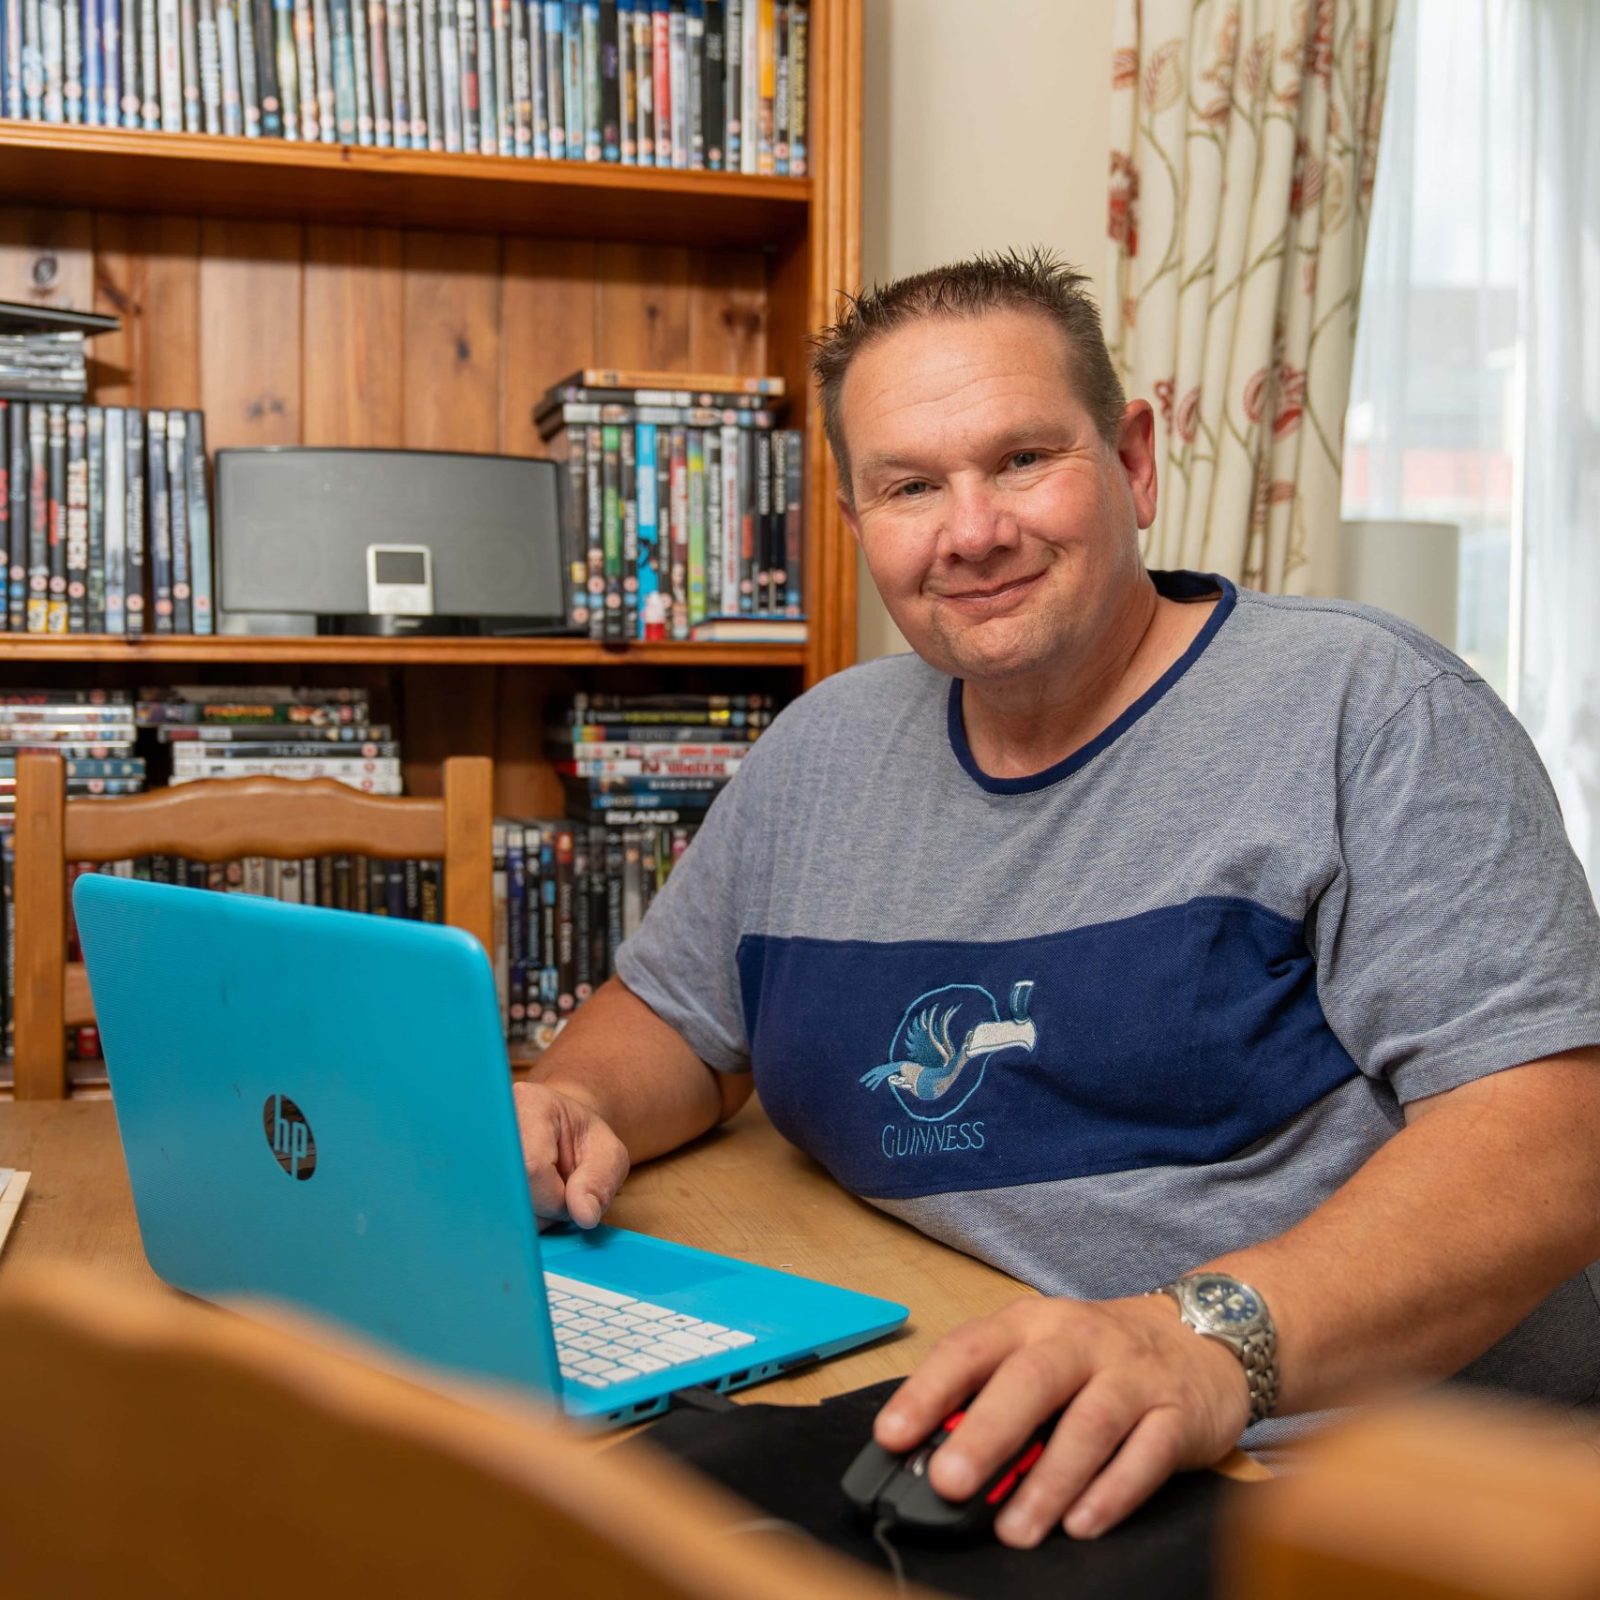 Trivallis Housing Landlord Wales A man seated at a wooden table with a blue laptop, smiling at the camera, with a bookshelf filled with DVDs in the background, inside his Trivallis housing in RCT.